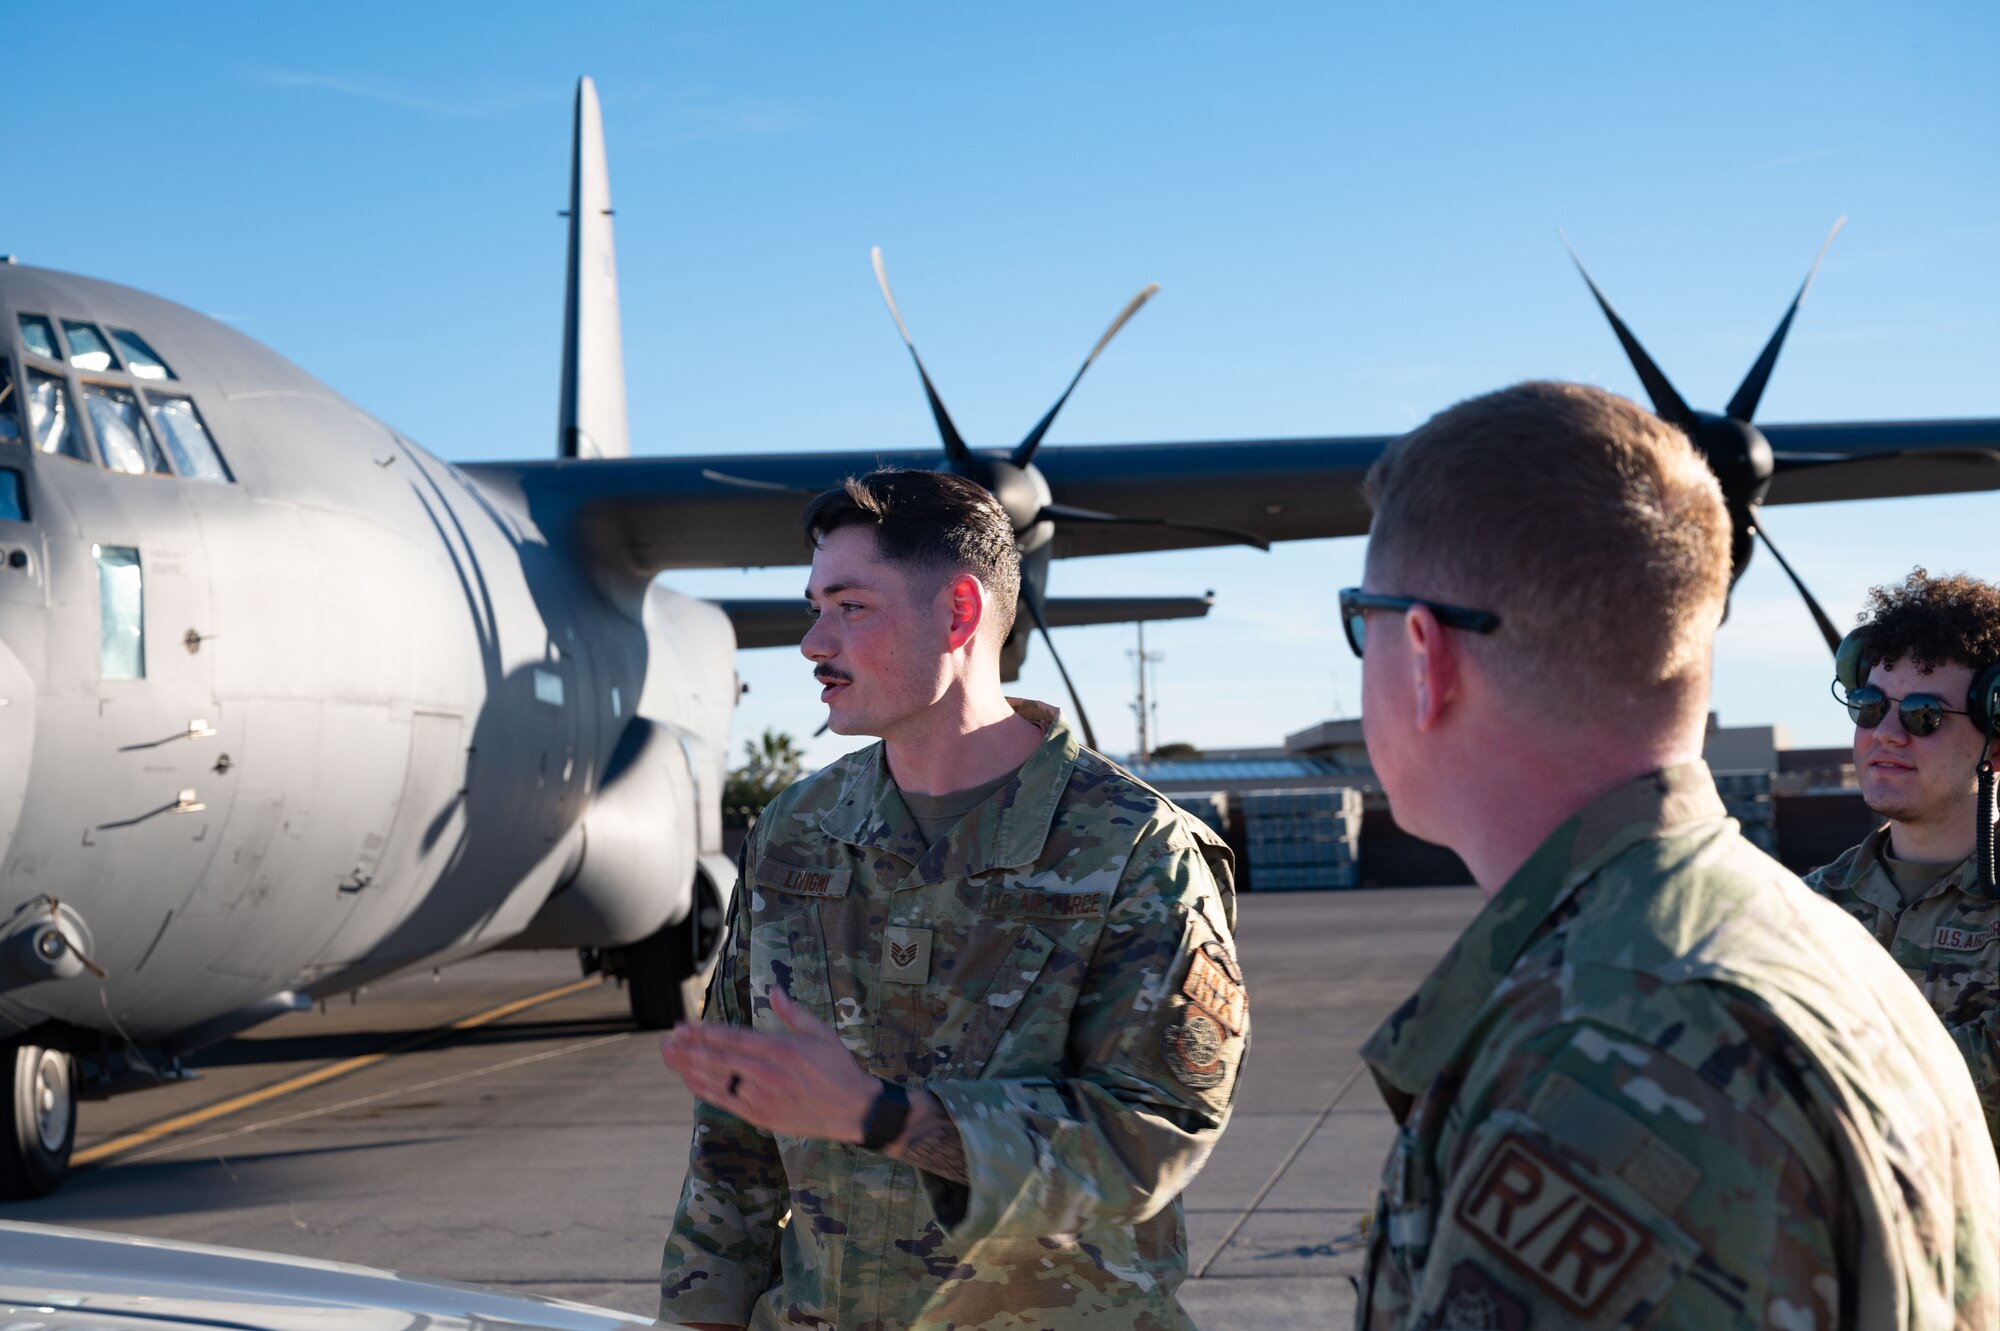 U.S. Air Force Staff Sgt. Blake Livigni, a 317th Aircraft Maintenance Squadron aircraft maintenance technician assigned to Dyess Air Force Base Texas, speaks with his team about maintenance procedures for the C-130J Super Hercules during Bamboo Eagle 24-1 at Nellis Air Force Base, Nevada, Jan. 29, 2024. Over 3,000 U.S. service members across four branches flew, maintained and supported more than 150 aircraft from over 20 units in multiple locations during Bamboo Eagle. (U.S. Air Force photo by Airman 1st Class Timothy Perish)